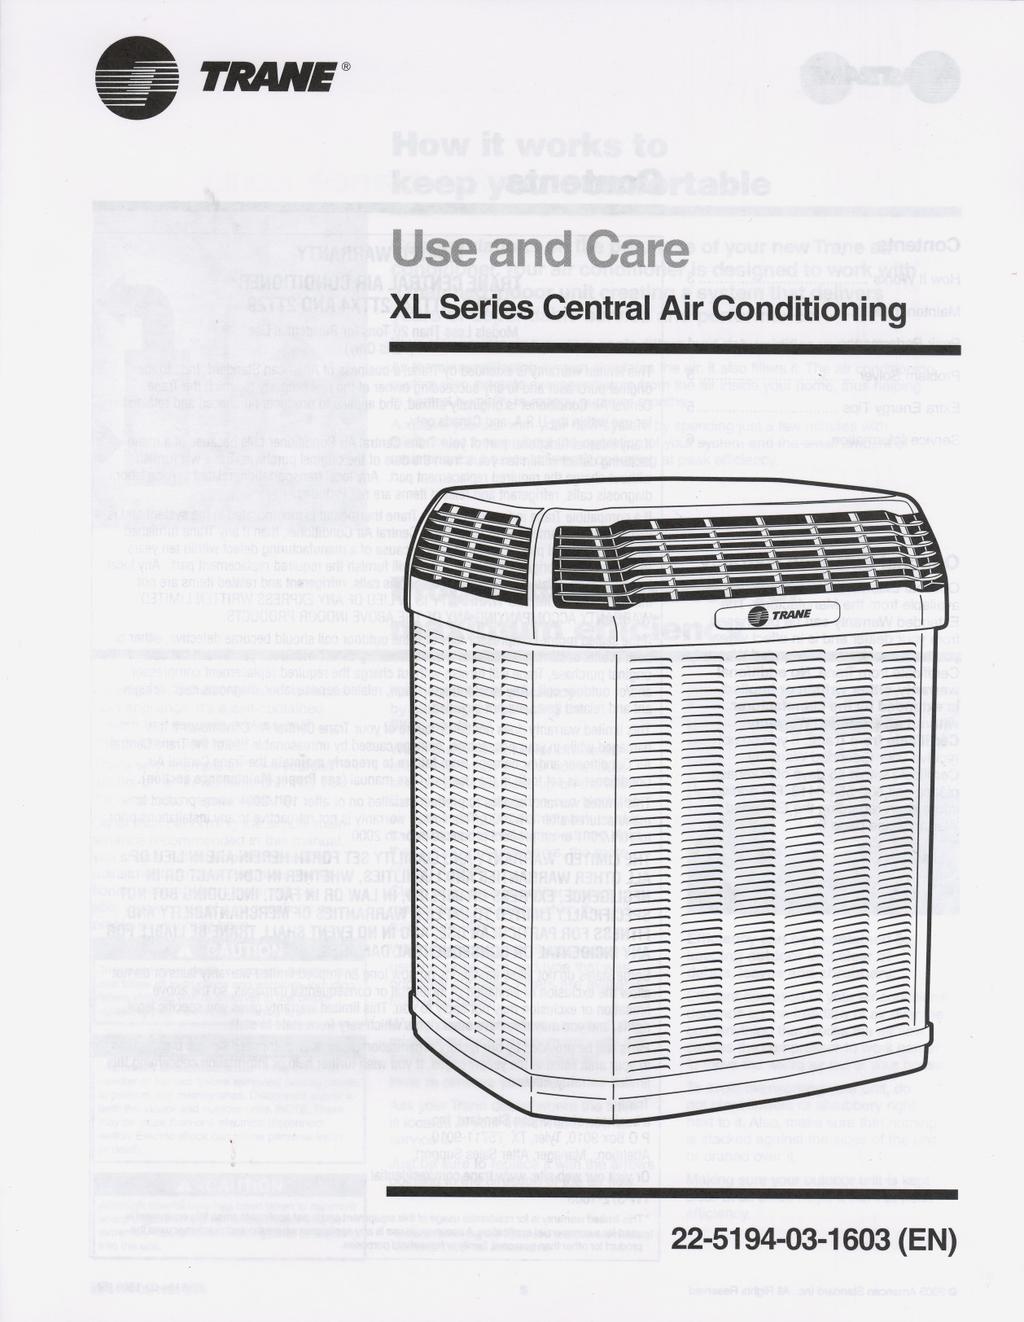 TRAIIE" Use and Care XL Series Central Air Conditioning - - - - - - -